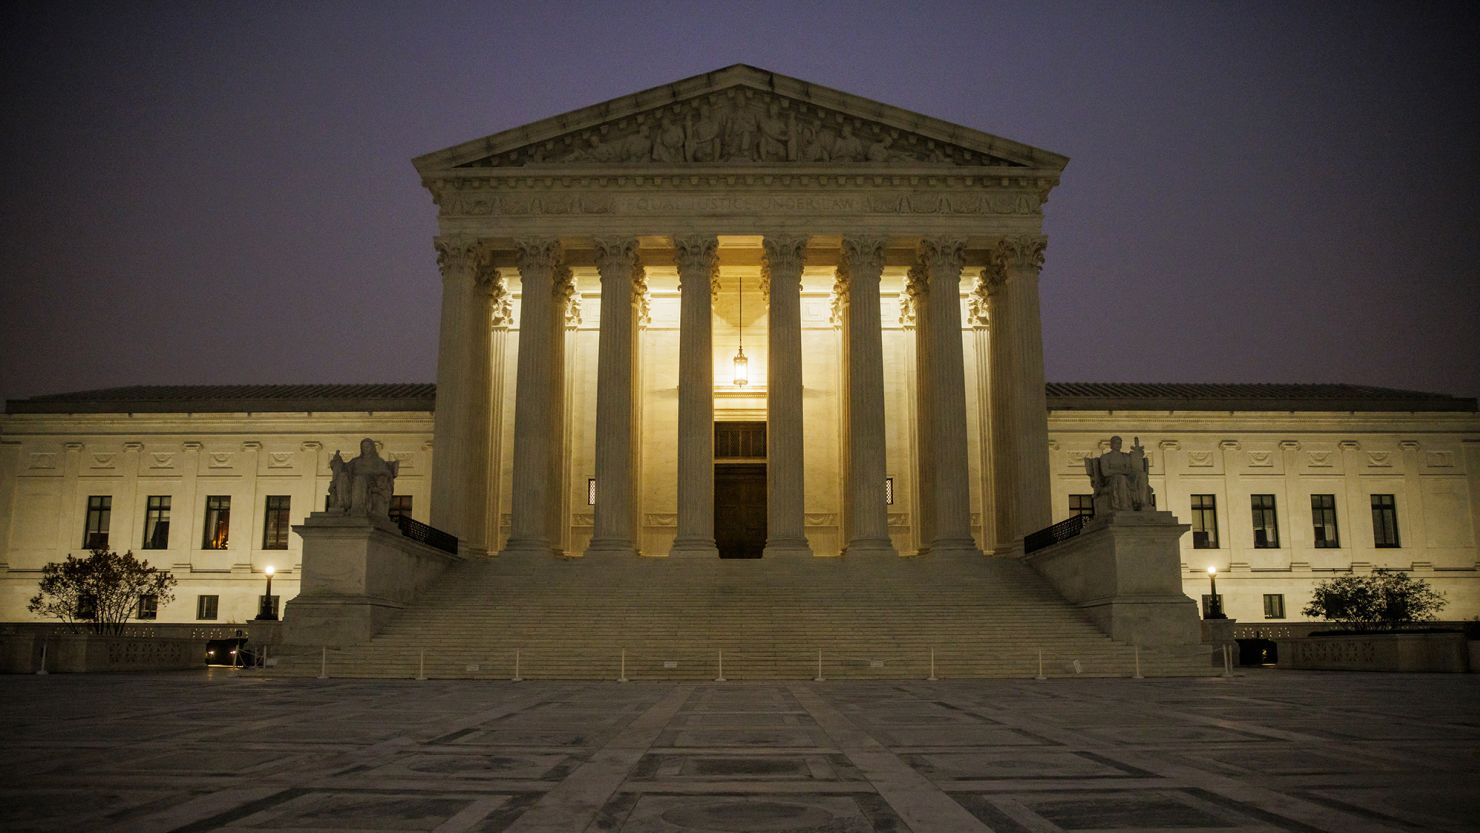 The U.S. Supreme Court is seen in the early morning hours of November 4, 2022 in Washington, DC. 